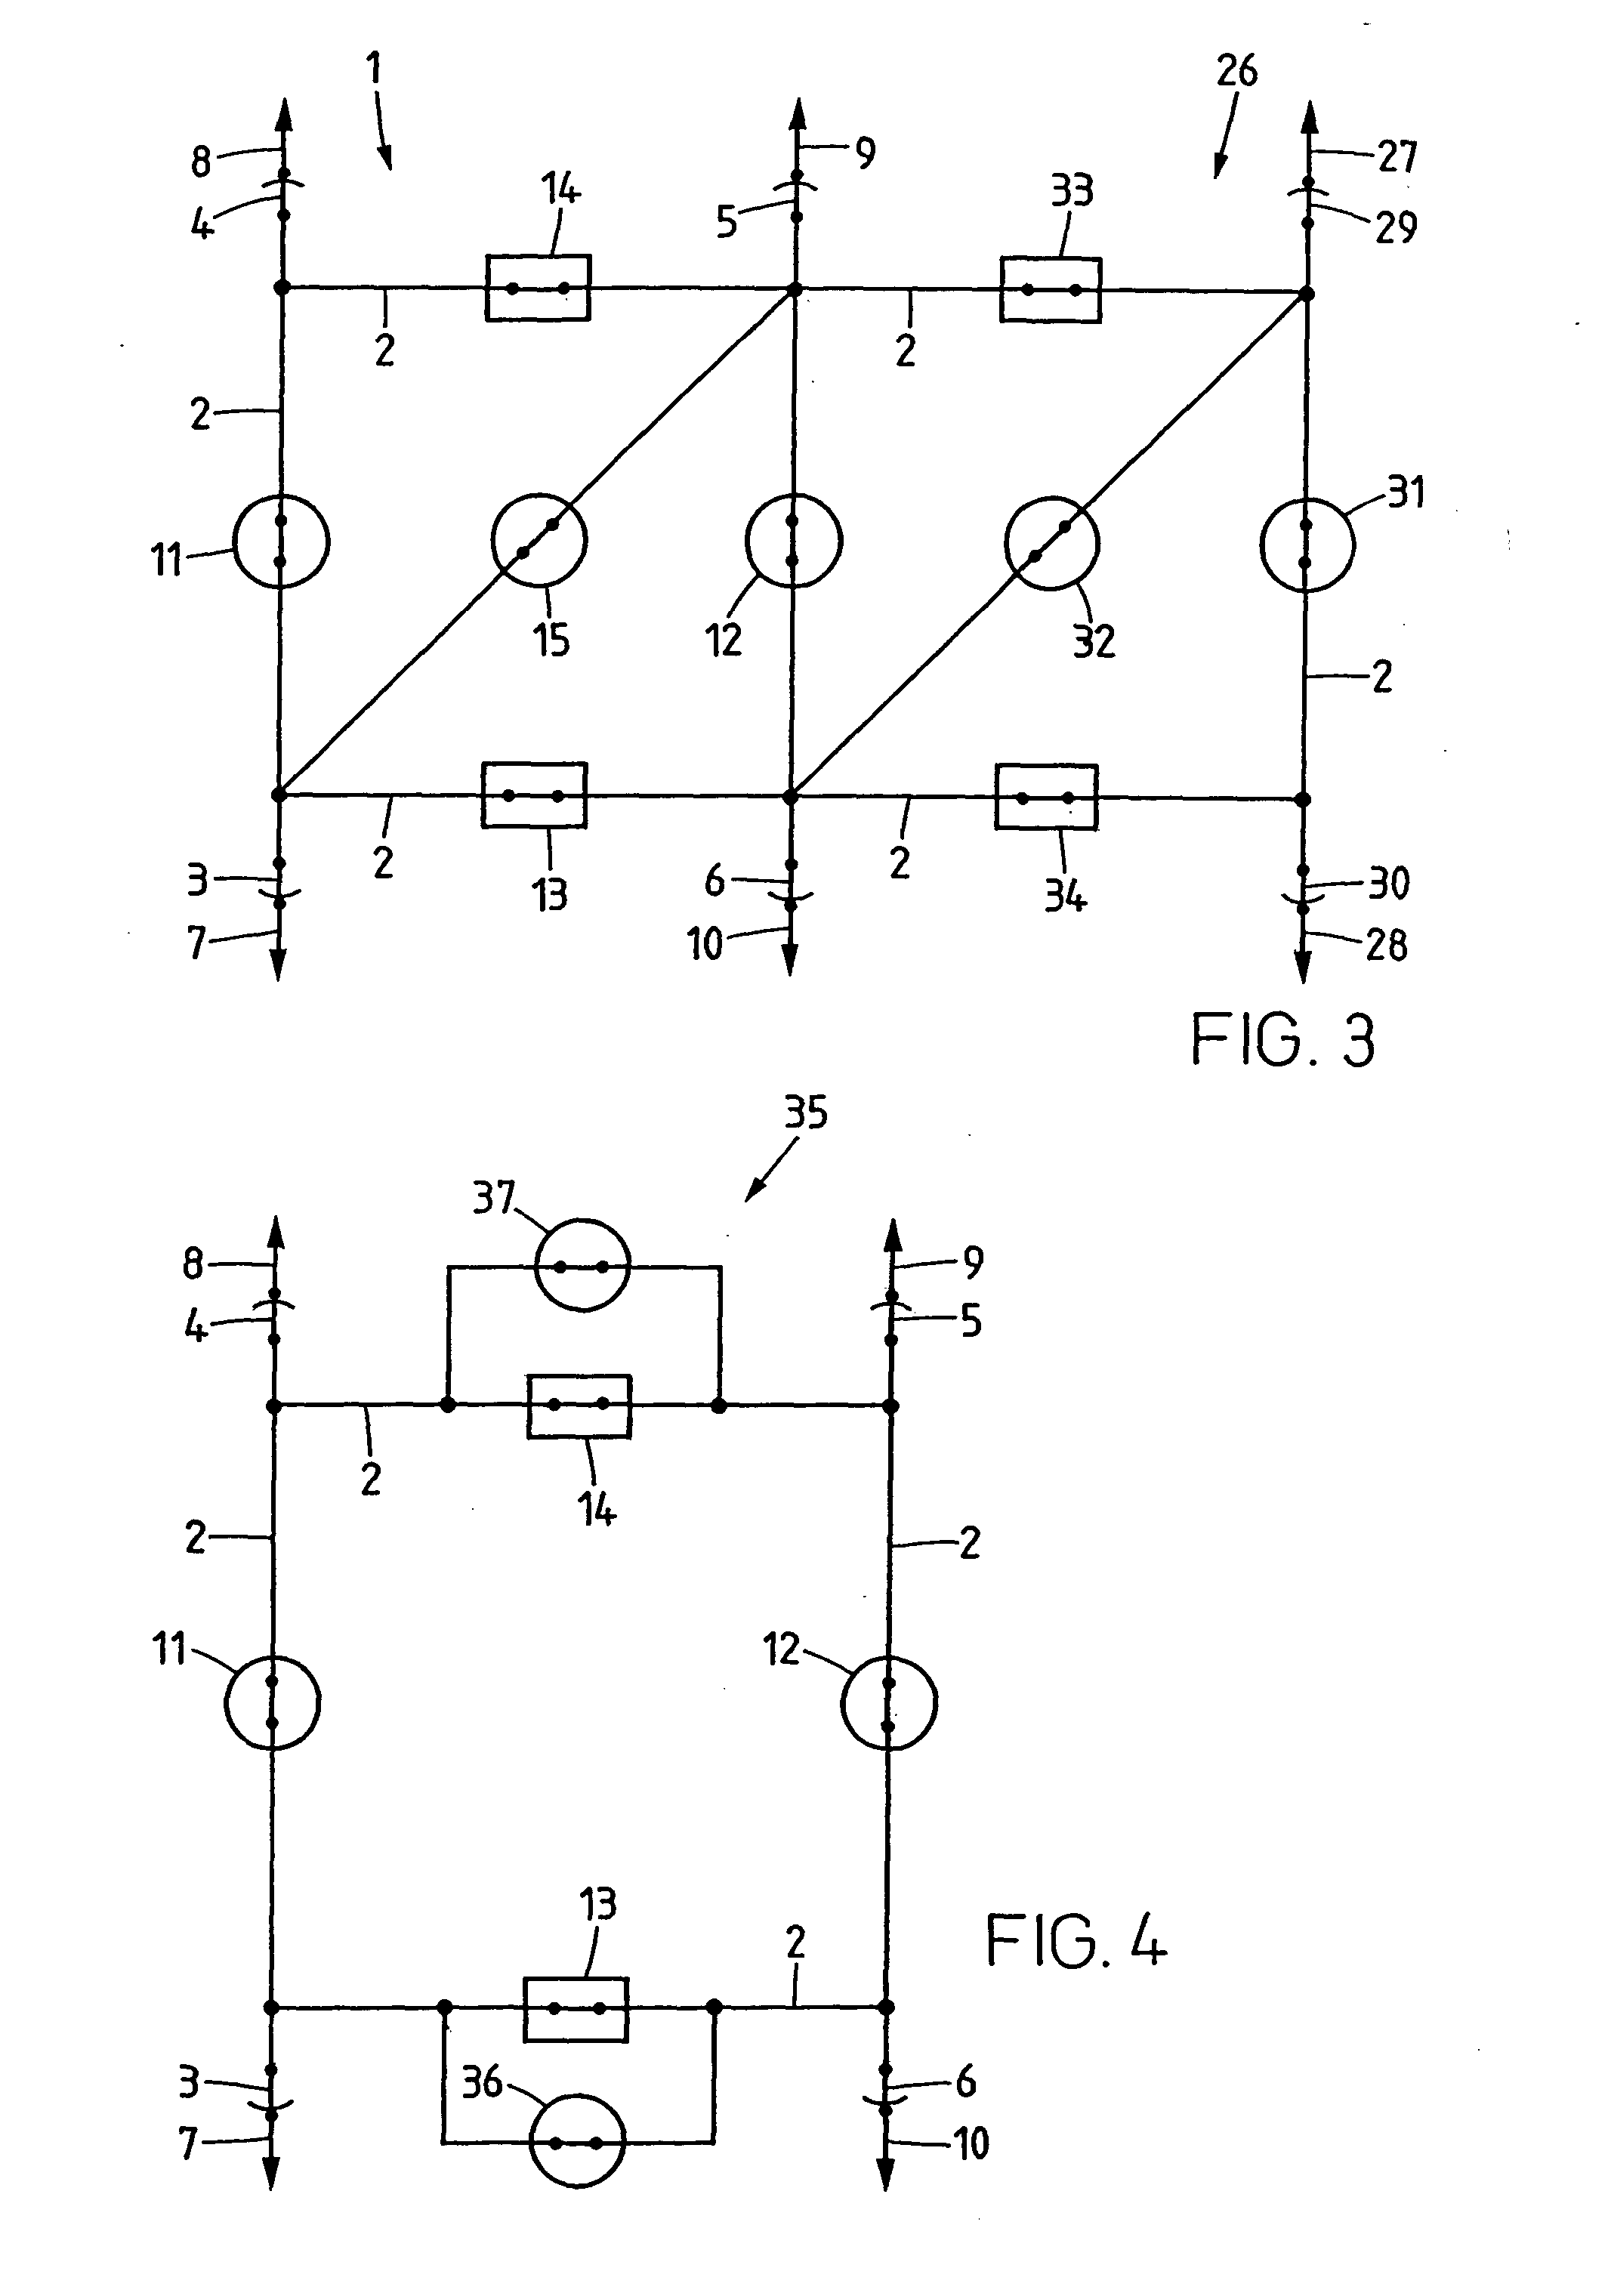 Switchgear assembly for distribution of electrical power